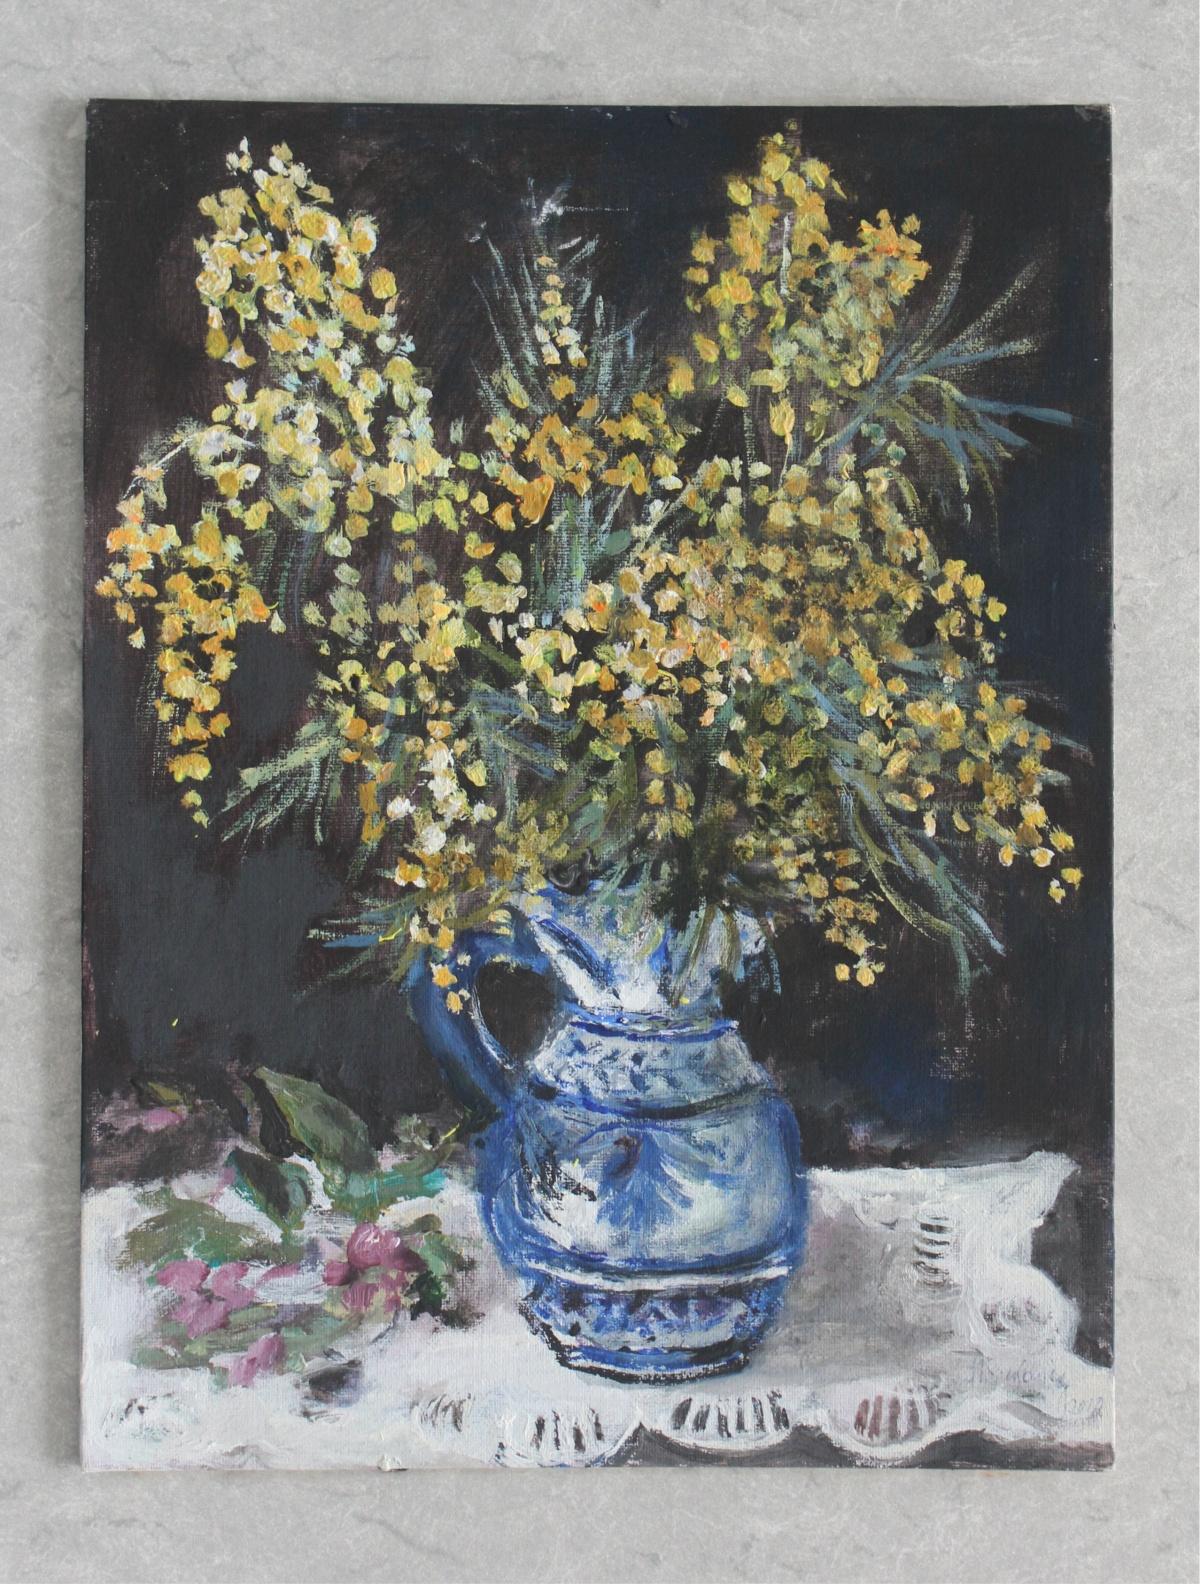 Yellow flowers - XXI century, Oil painting, Figurative, Grey tones, Still life - Painting by Magdalena Spasowicz